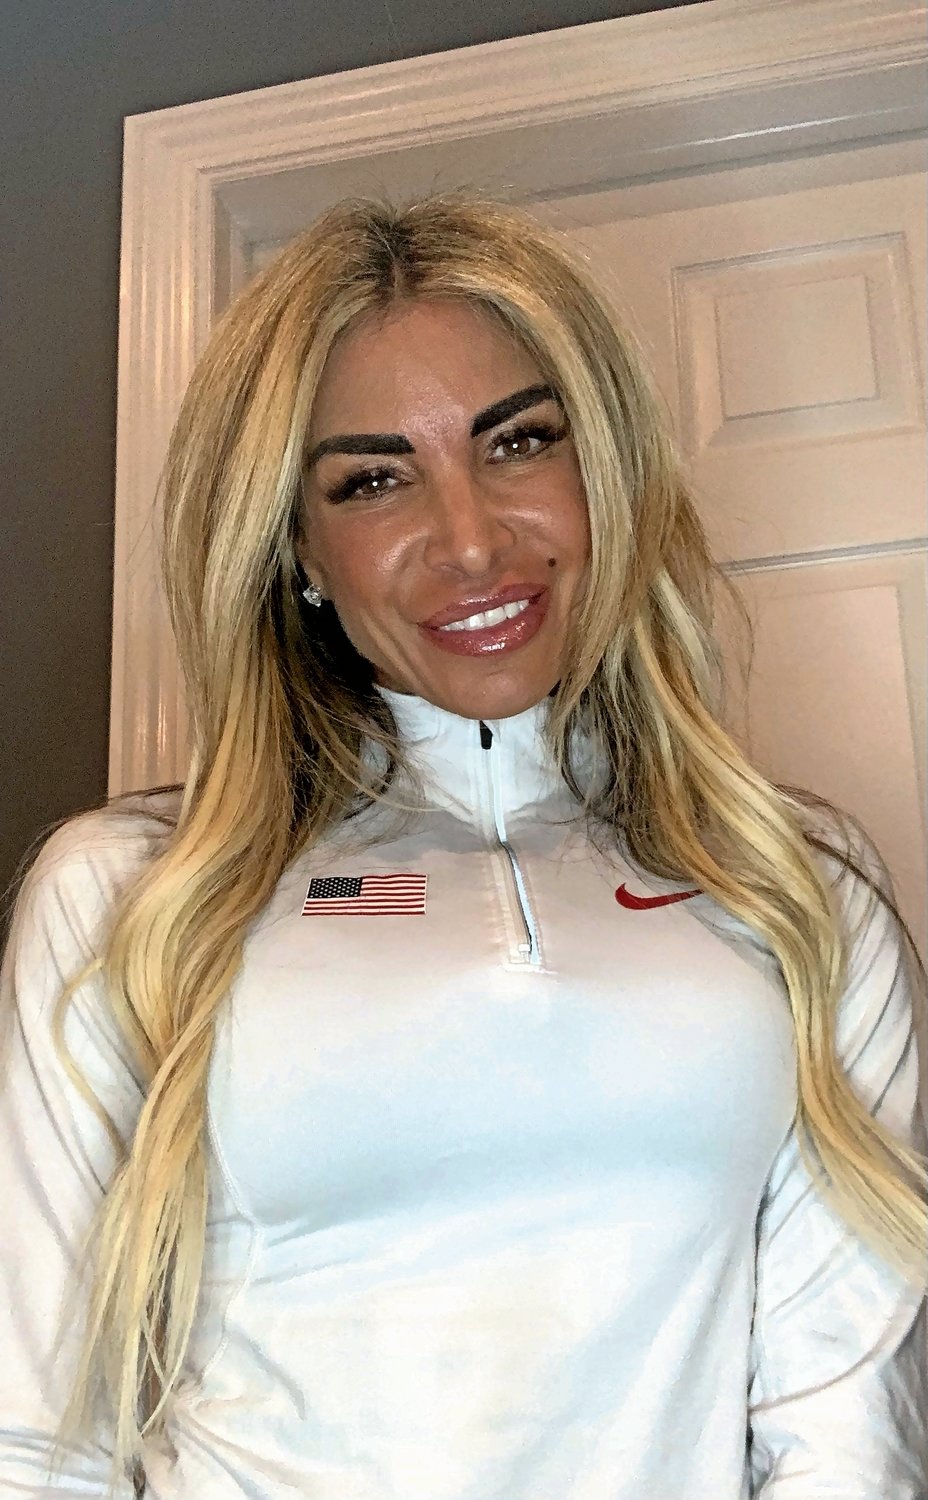 Former Oyster Bay resident Deb Milano-Granito has been chosen to be USA Track & Field Long Island Youth president. Her squad trains in Oyster Bay and many members live in the hamlet.